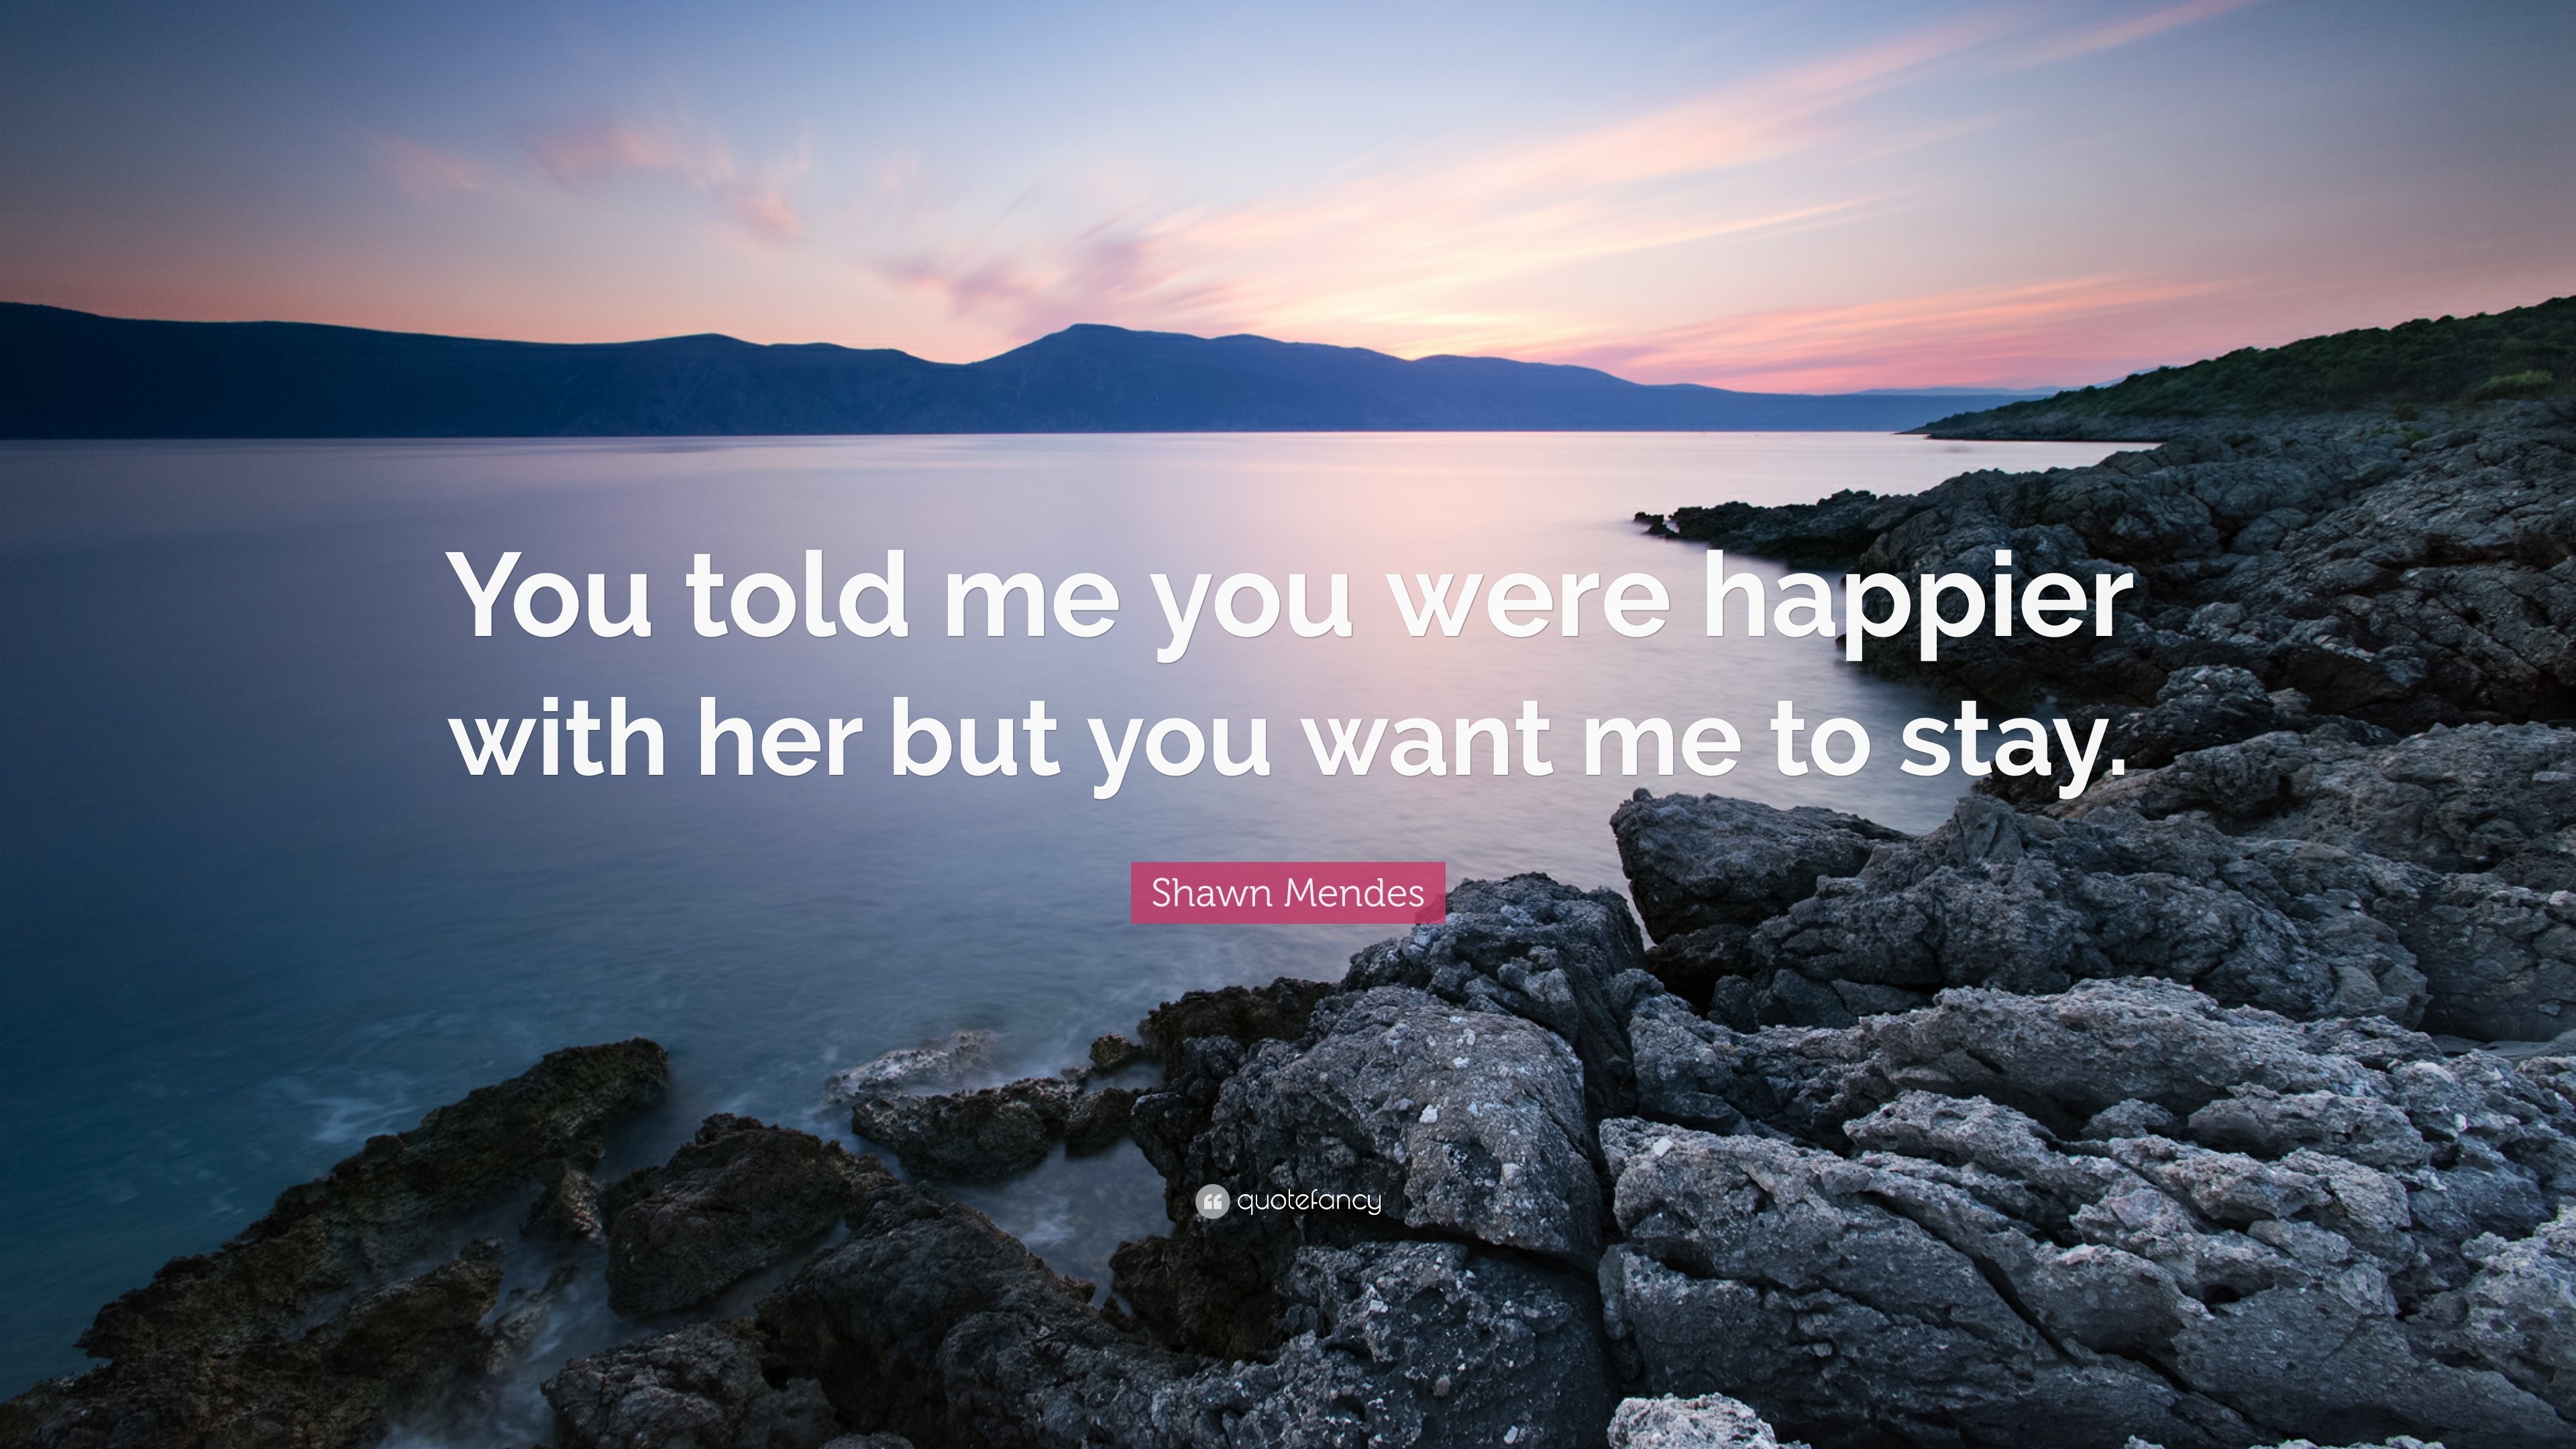 3840x2160 Shawn Mendes Quote: “You told me you were happier with her but you want